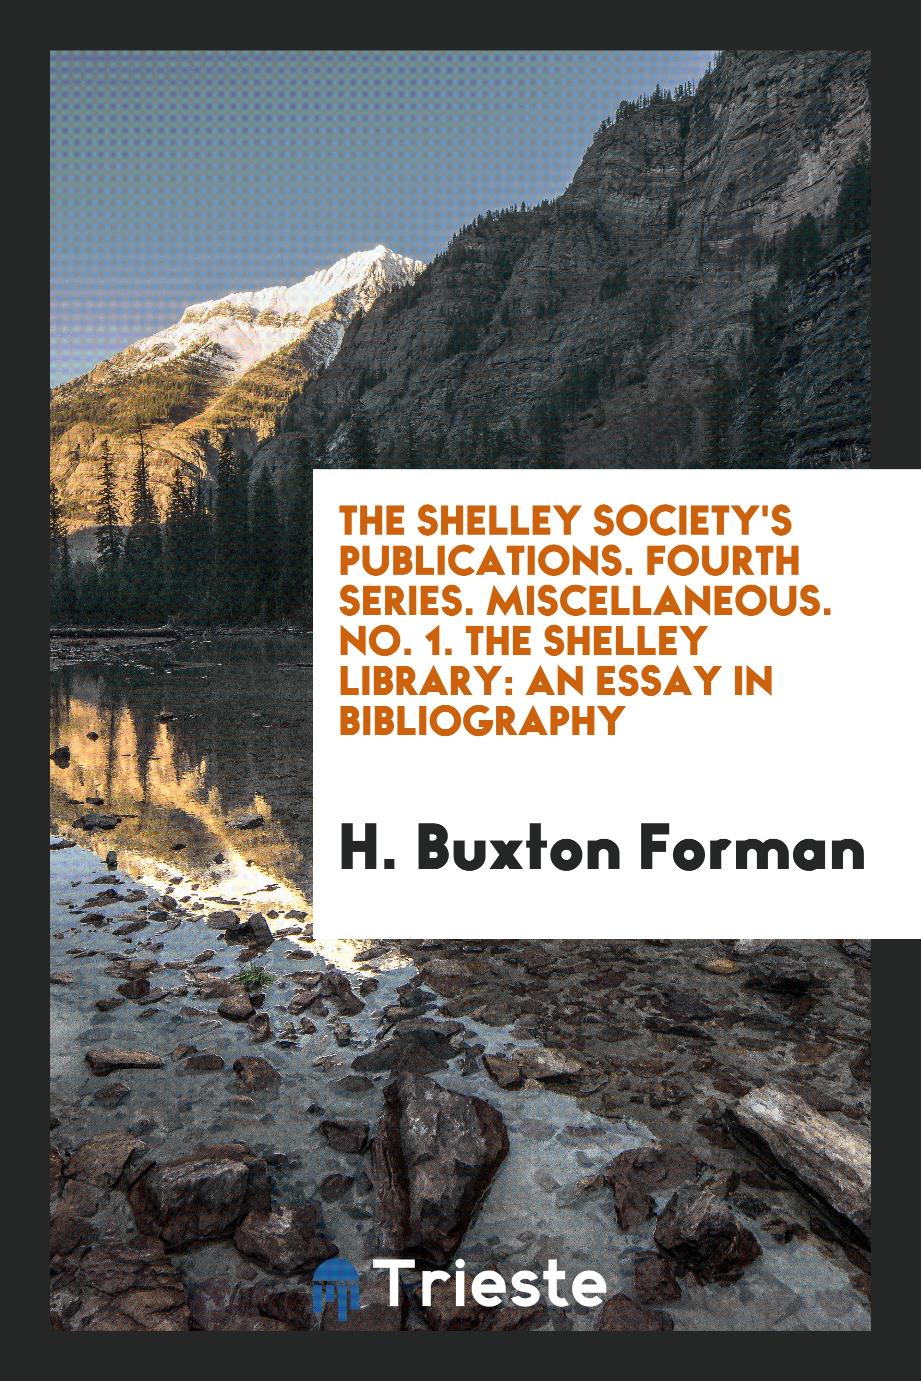 The Shelley Society's Publications. Fourth Series. Miscellaneous. No. 1. The Shelley Library: An Essay in Bibliography